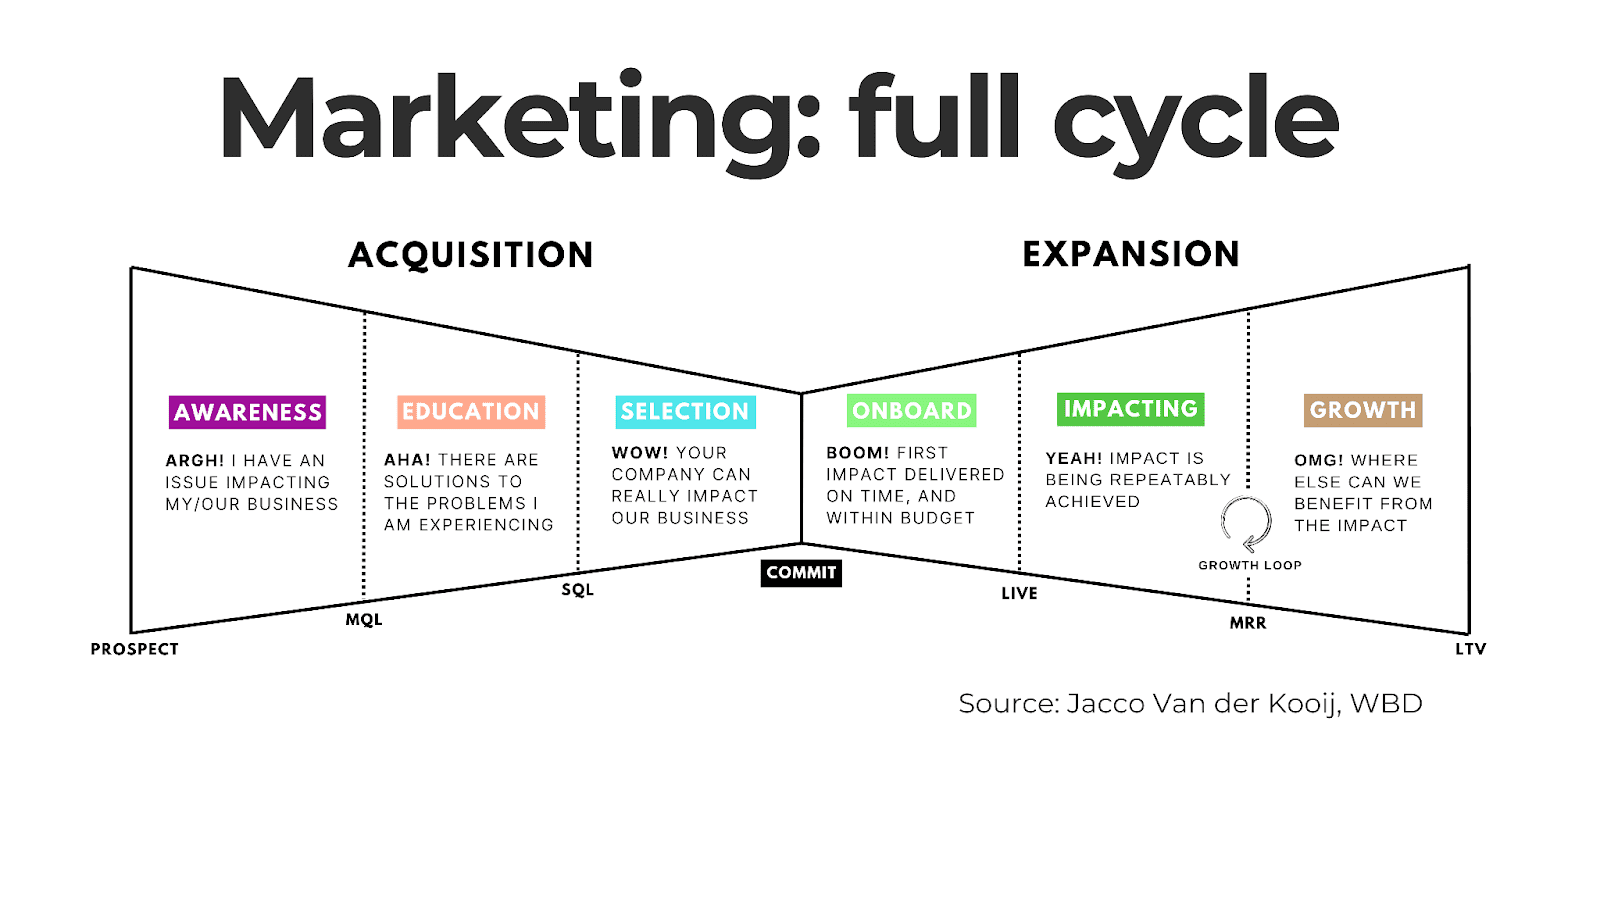 Marketing cycle graph. Bow tie graph. On the left side it shows the stages of Acquisition and on the right side it shows the stages of Expansion.